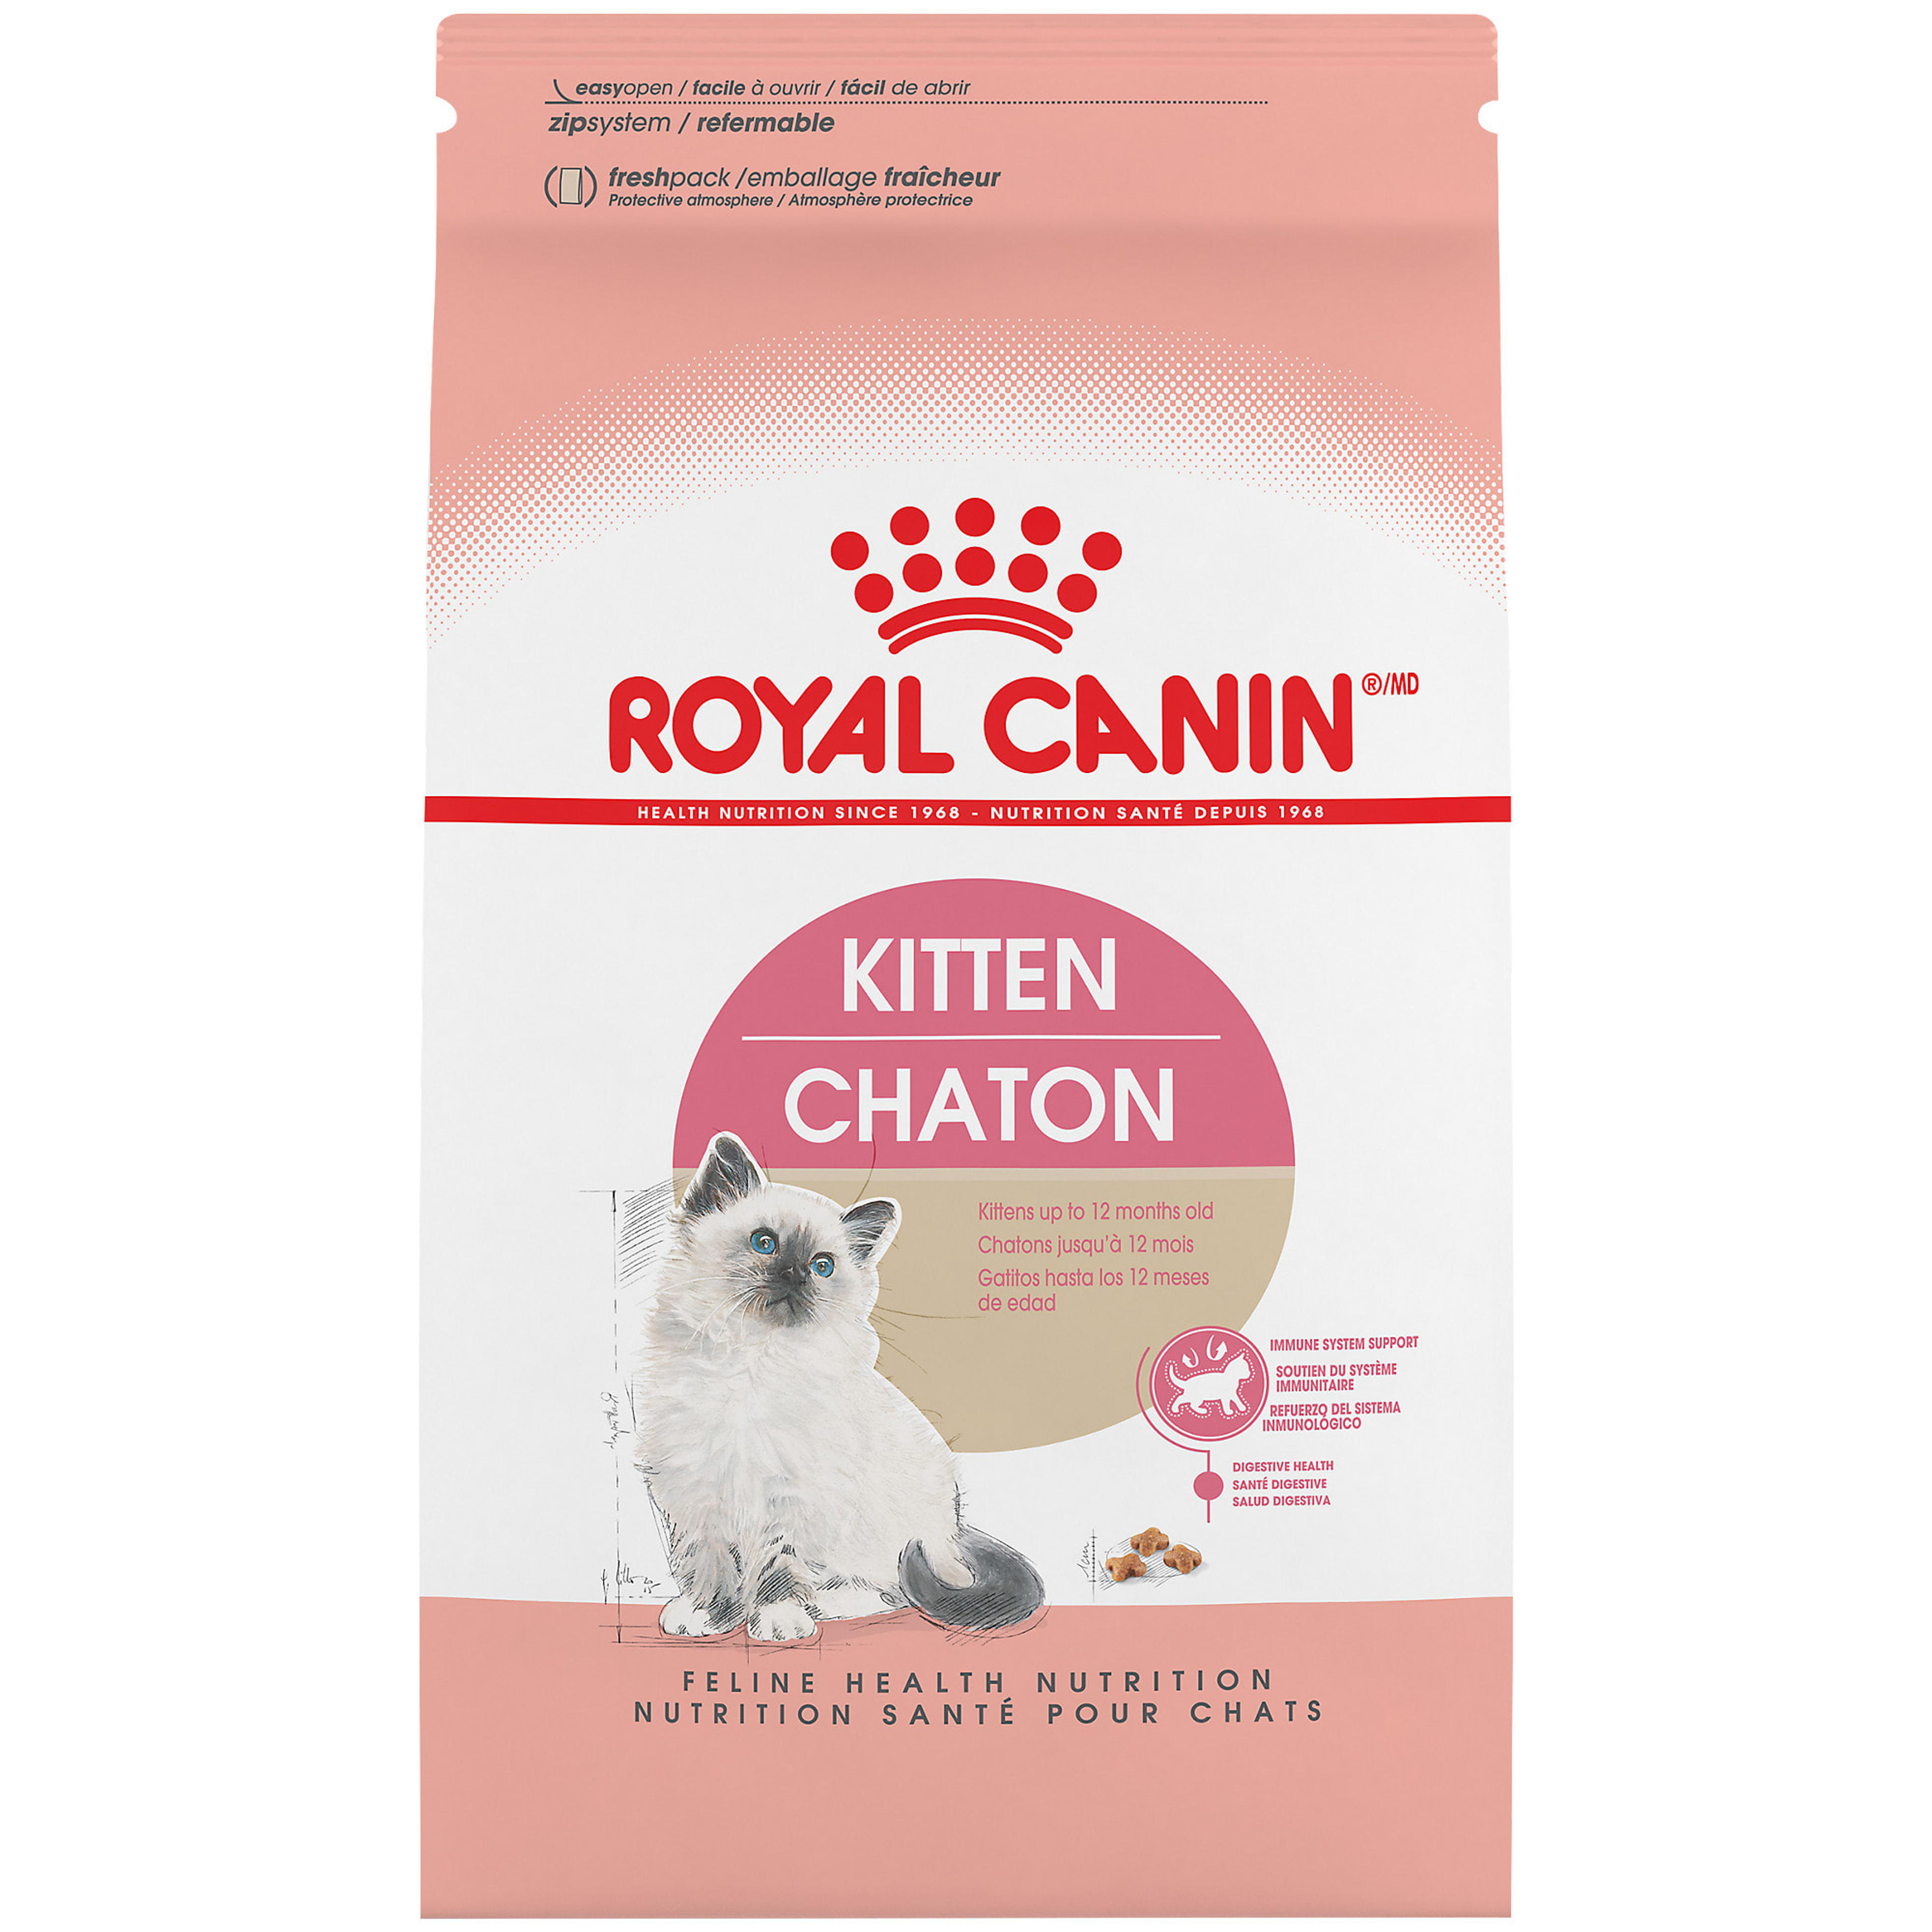 Royal Canin Feline Health Nutrition Dry Food for Young Kittens, 15 lbs.